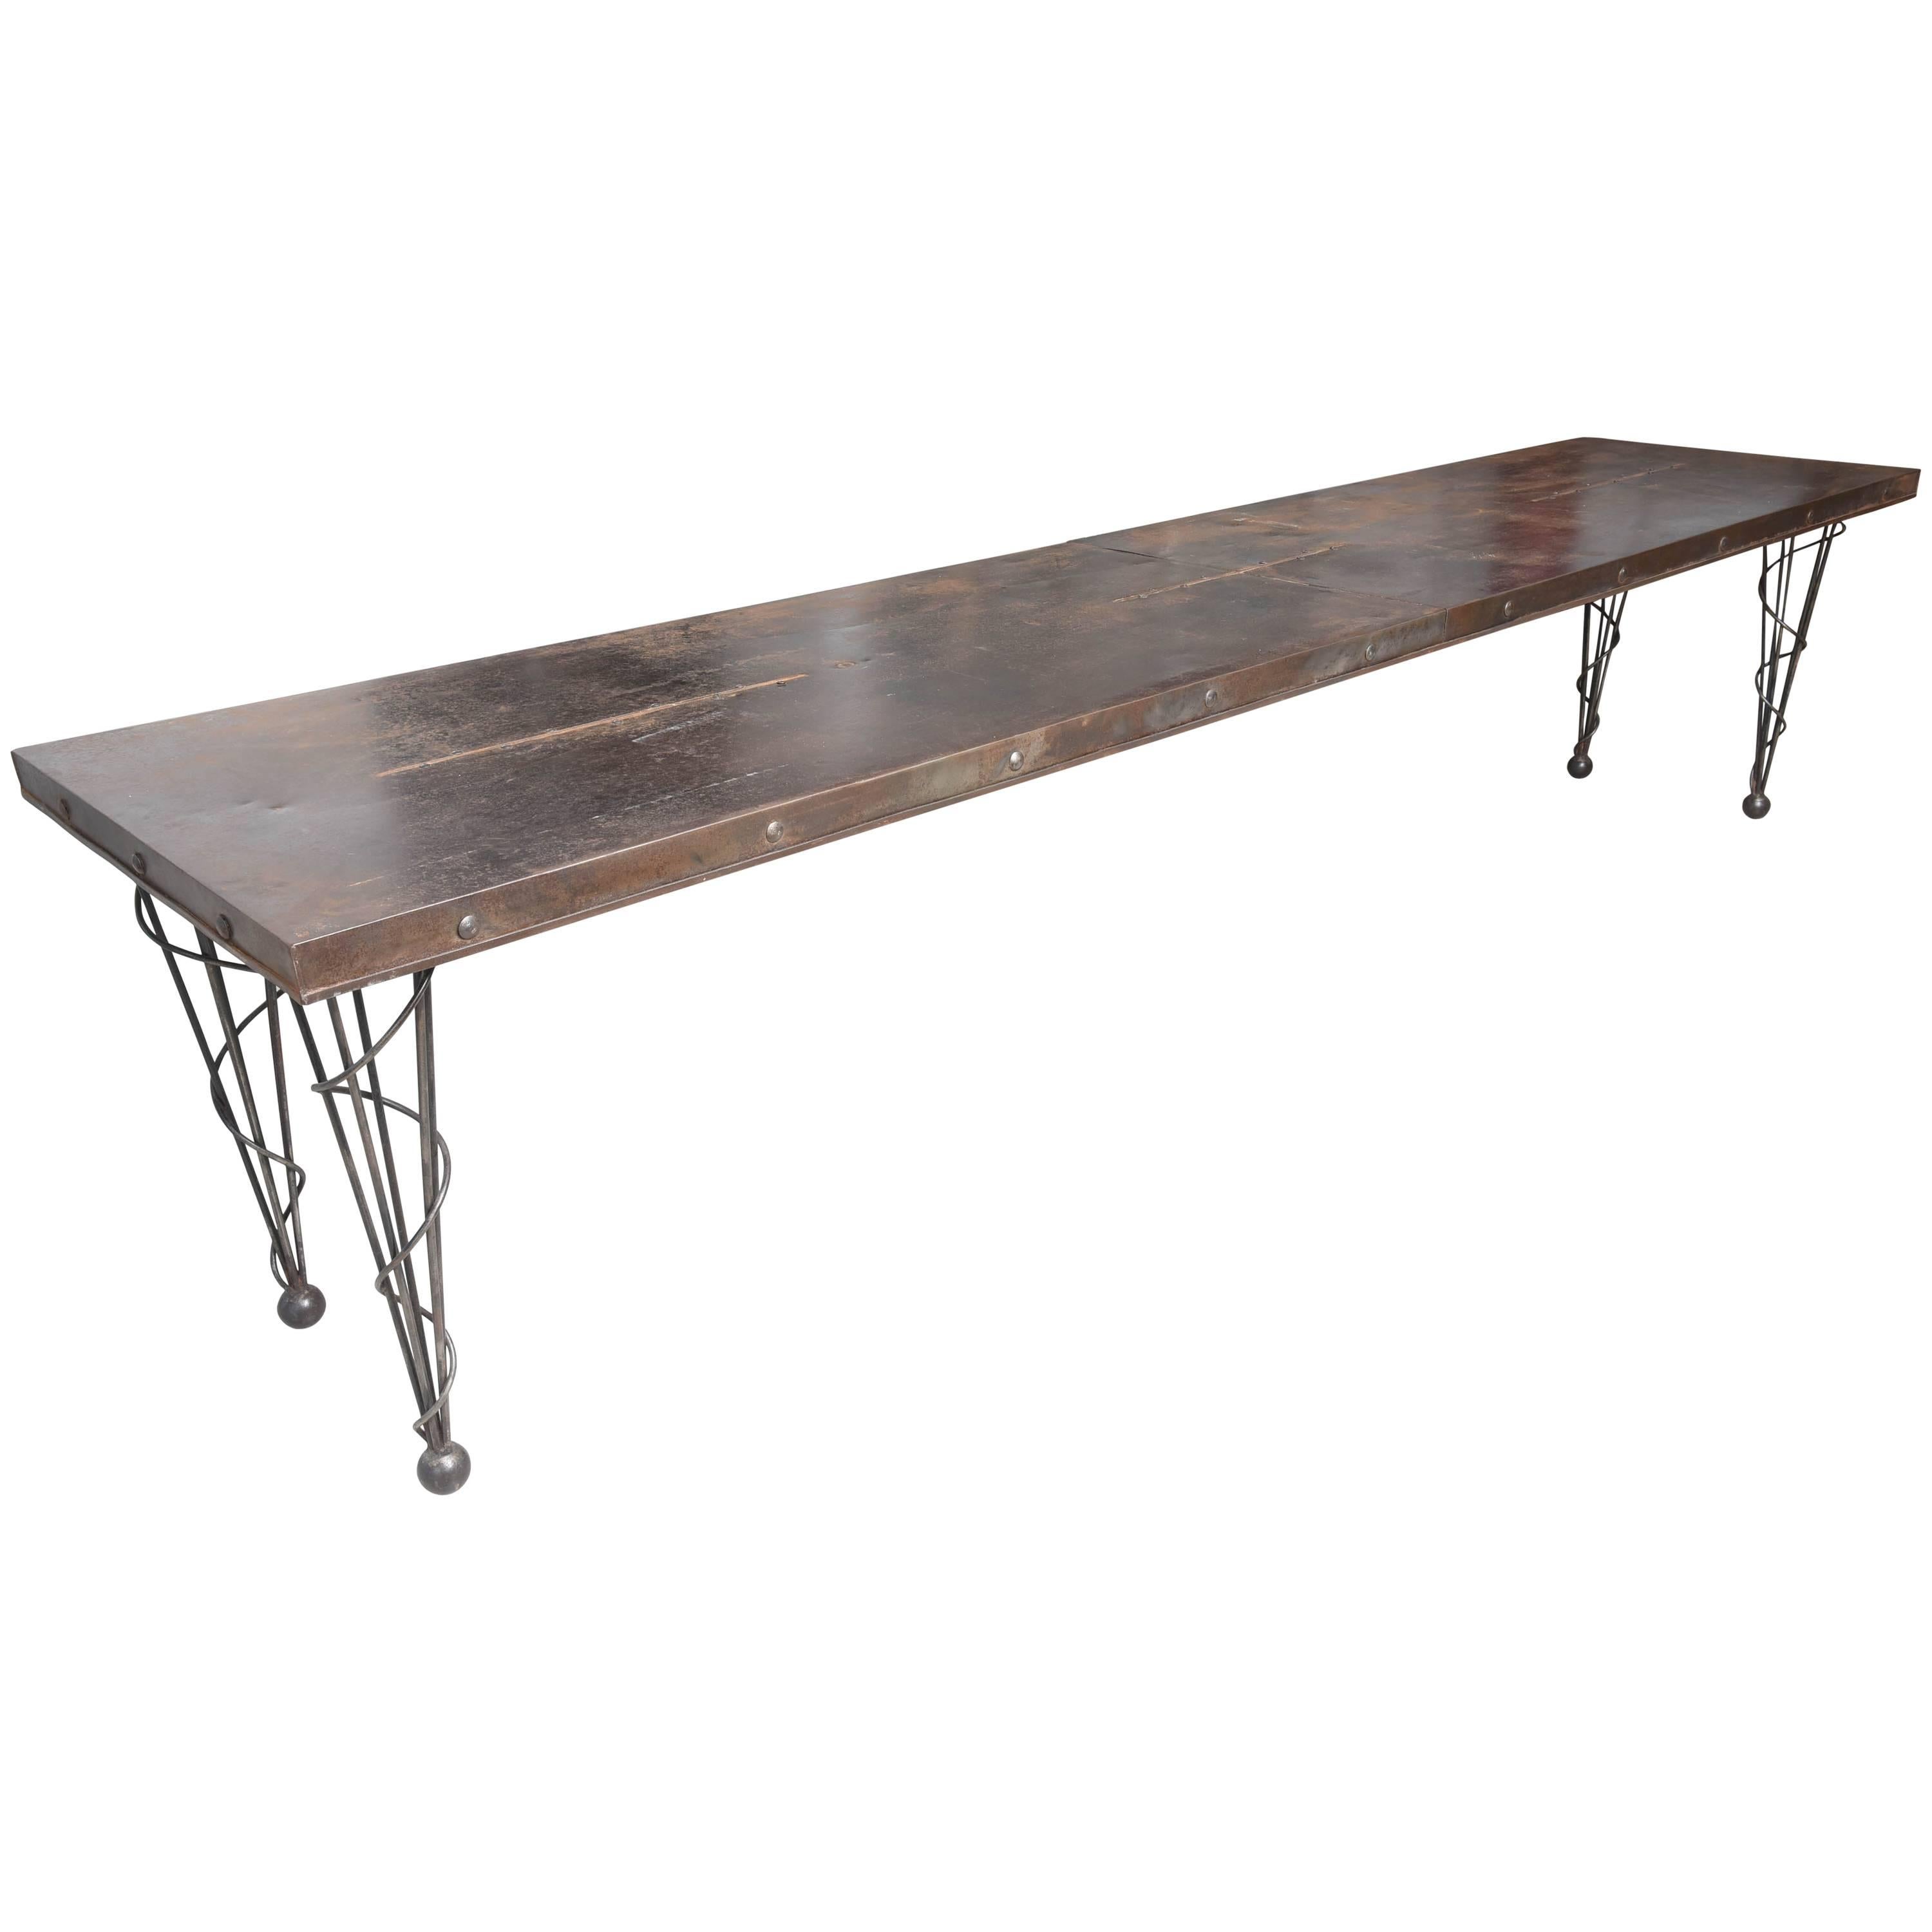 Vintage French Industrial Factory Table